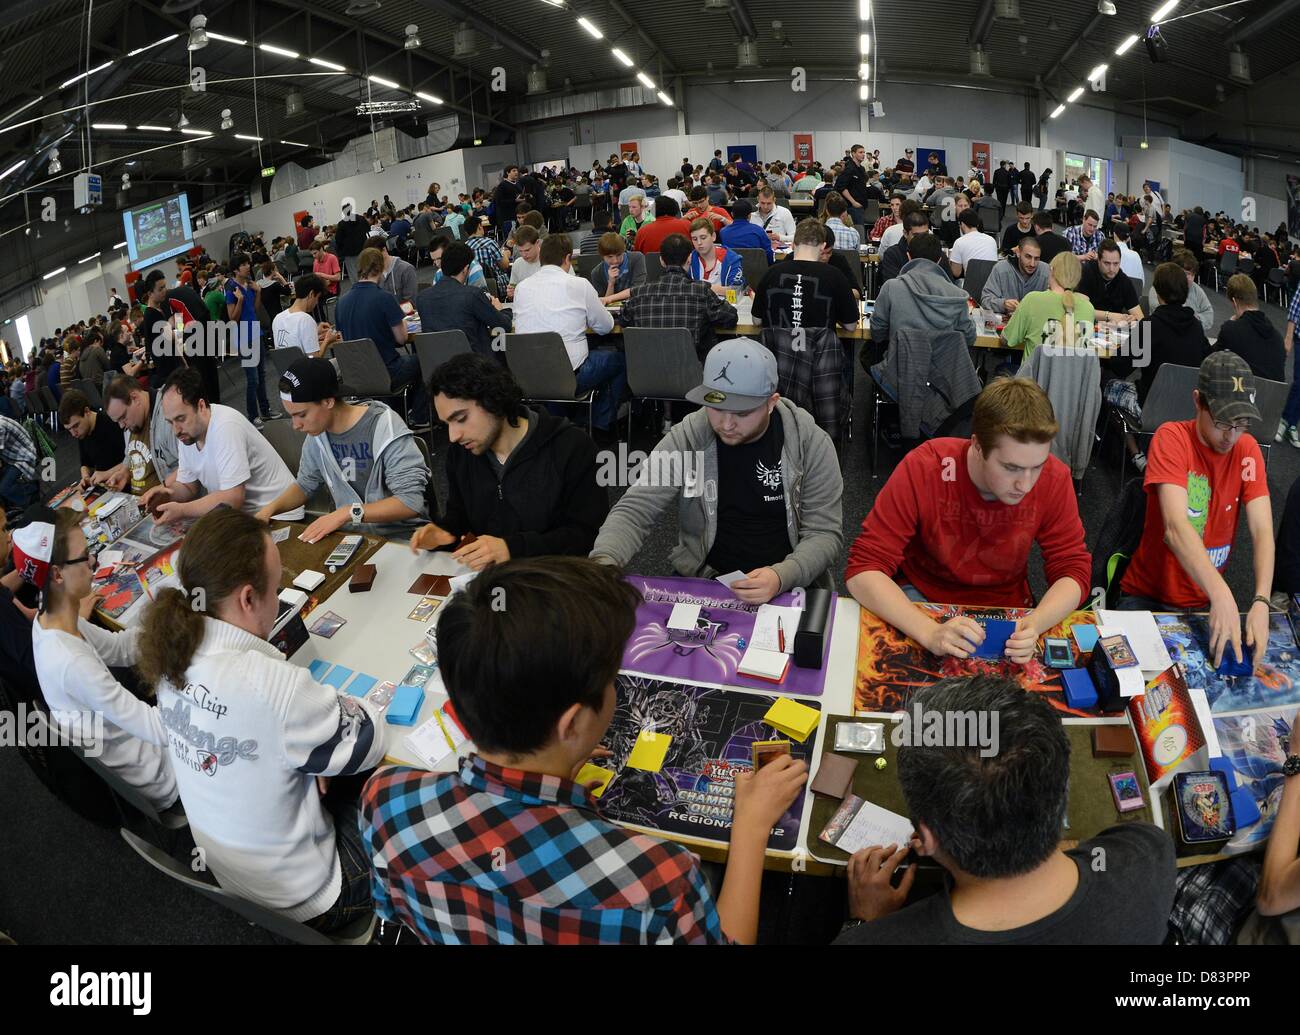 Participants of the German Yu-Gi-Oh! Trading Card Game Championships play against each other in Schkeuditz, Germany, 18 May 2013. More than 800 players competed against each other to win the title of German champion of the Japanese card game. The best 32 players achieved a qualification for the European Championships at the end of June i n Frankfurt (Main). Photo: Hendrik Schmidt/dpa Stock Photo